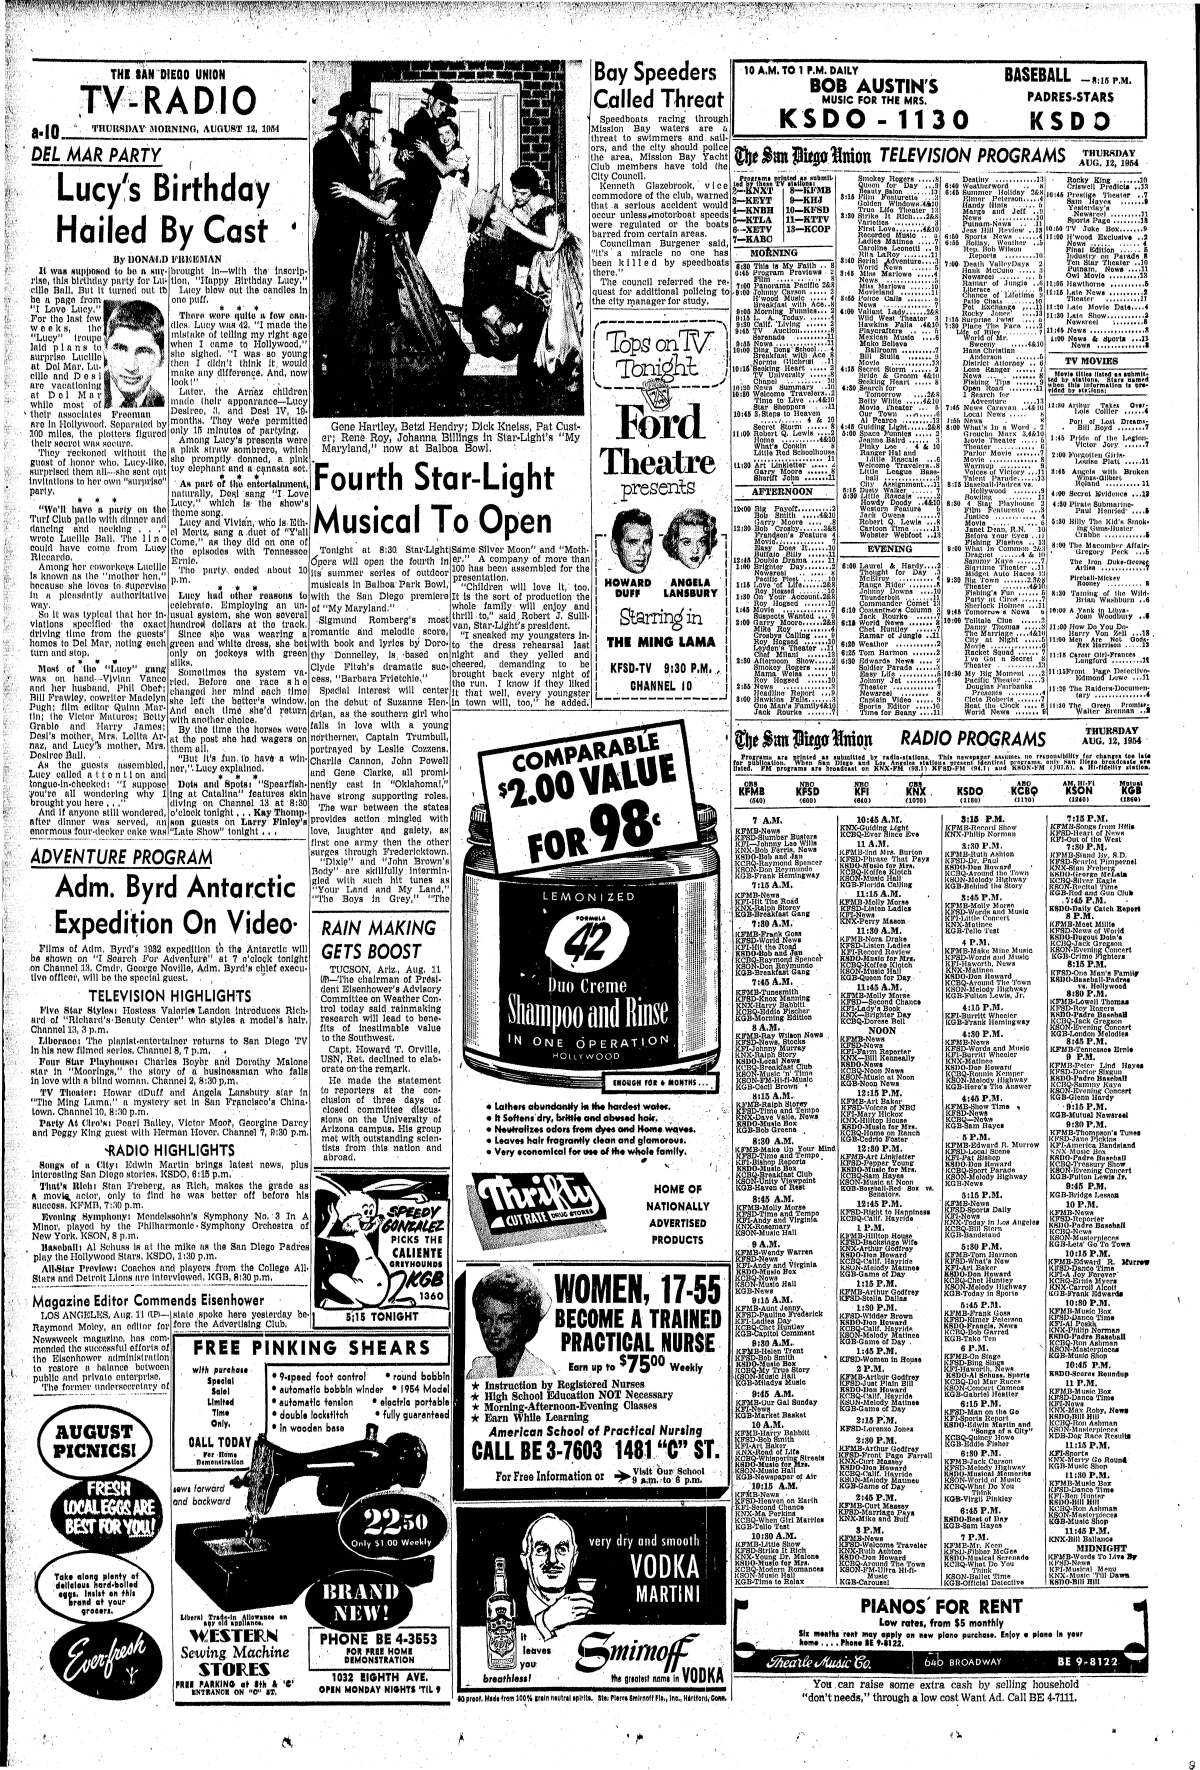 "Lucy's Birthday Hailed By Cast," published in The San Diego Union, Aug. 12, 1954.